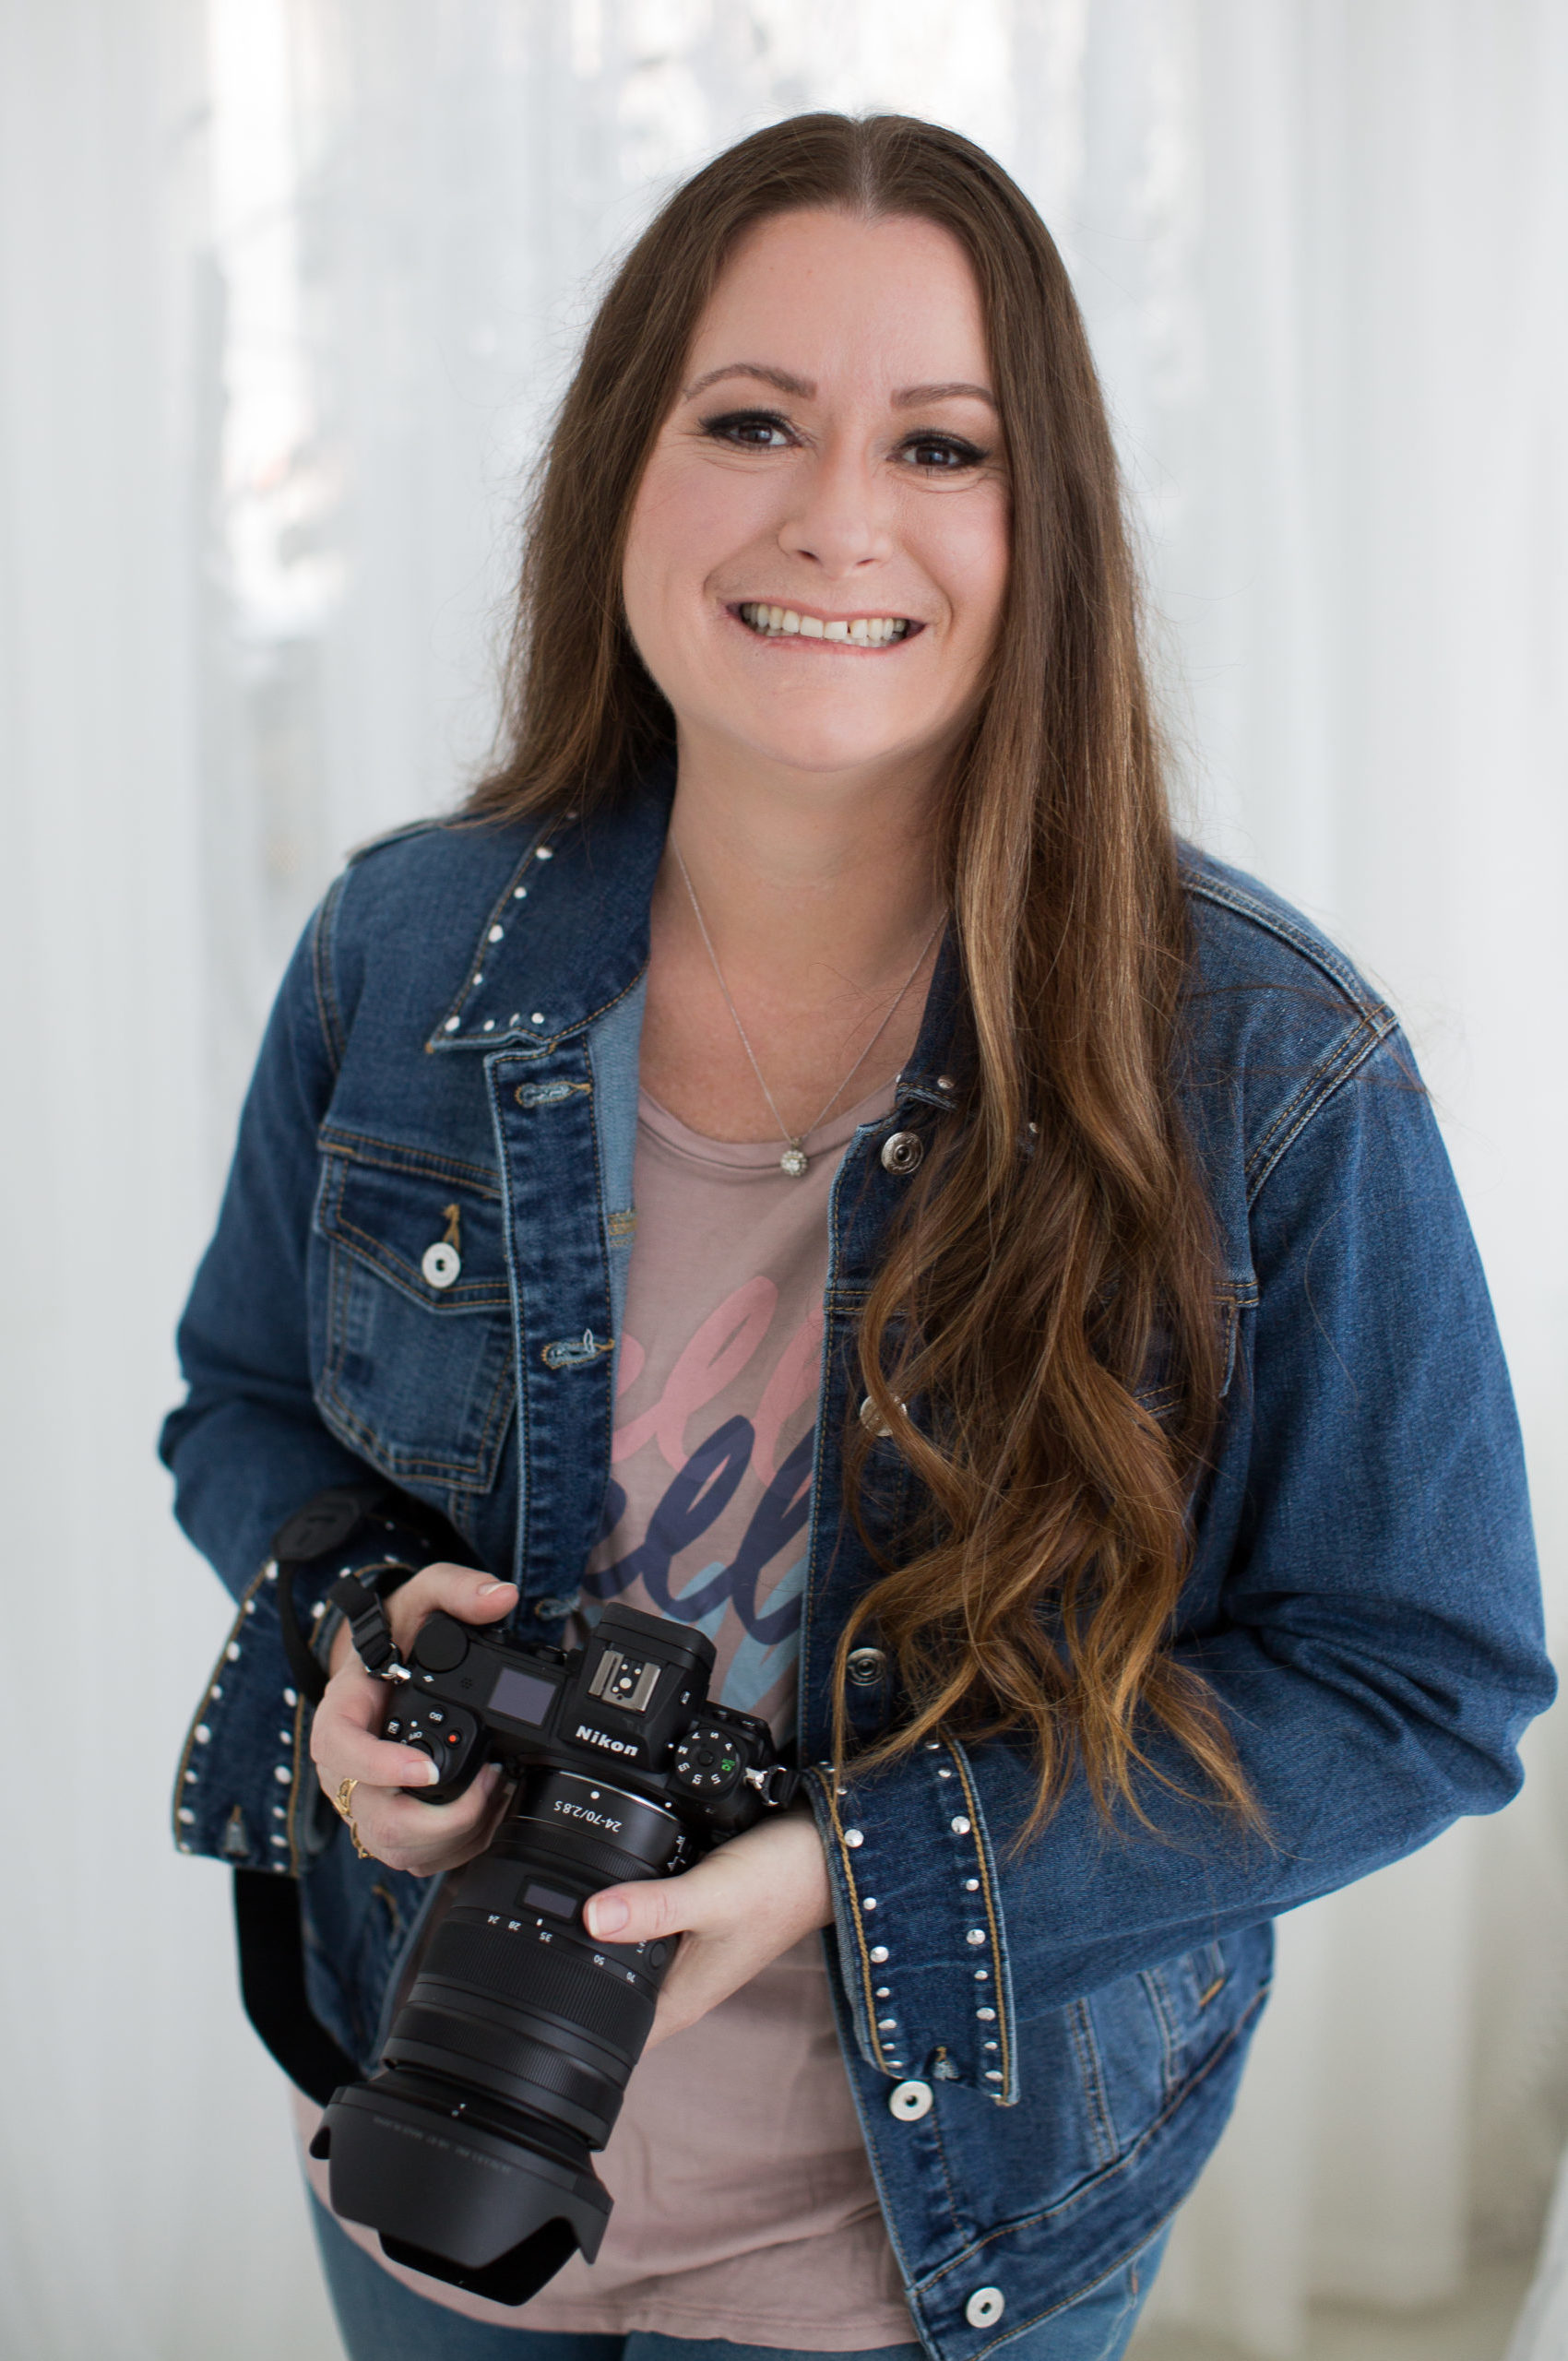 Senior Portrait Photographer in Her Studio | Behind the Scenes with Amanda Howse Photography in Tacoma